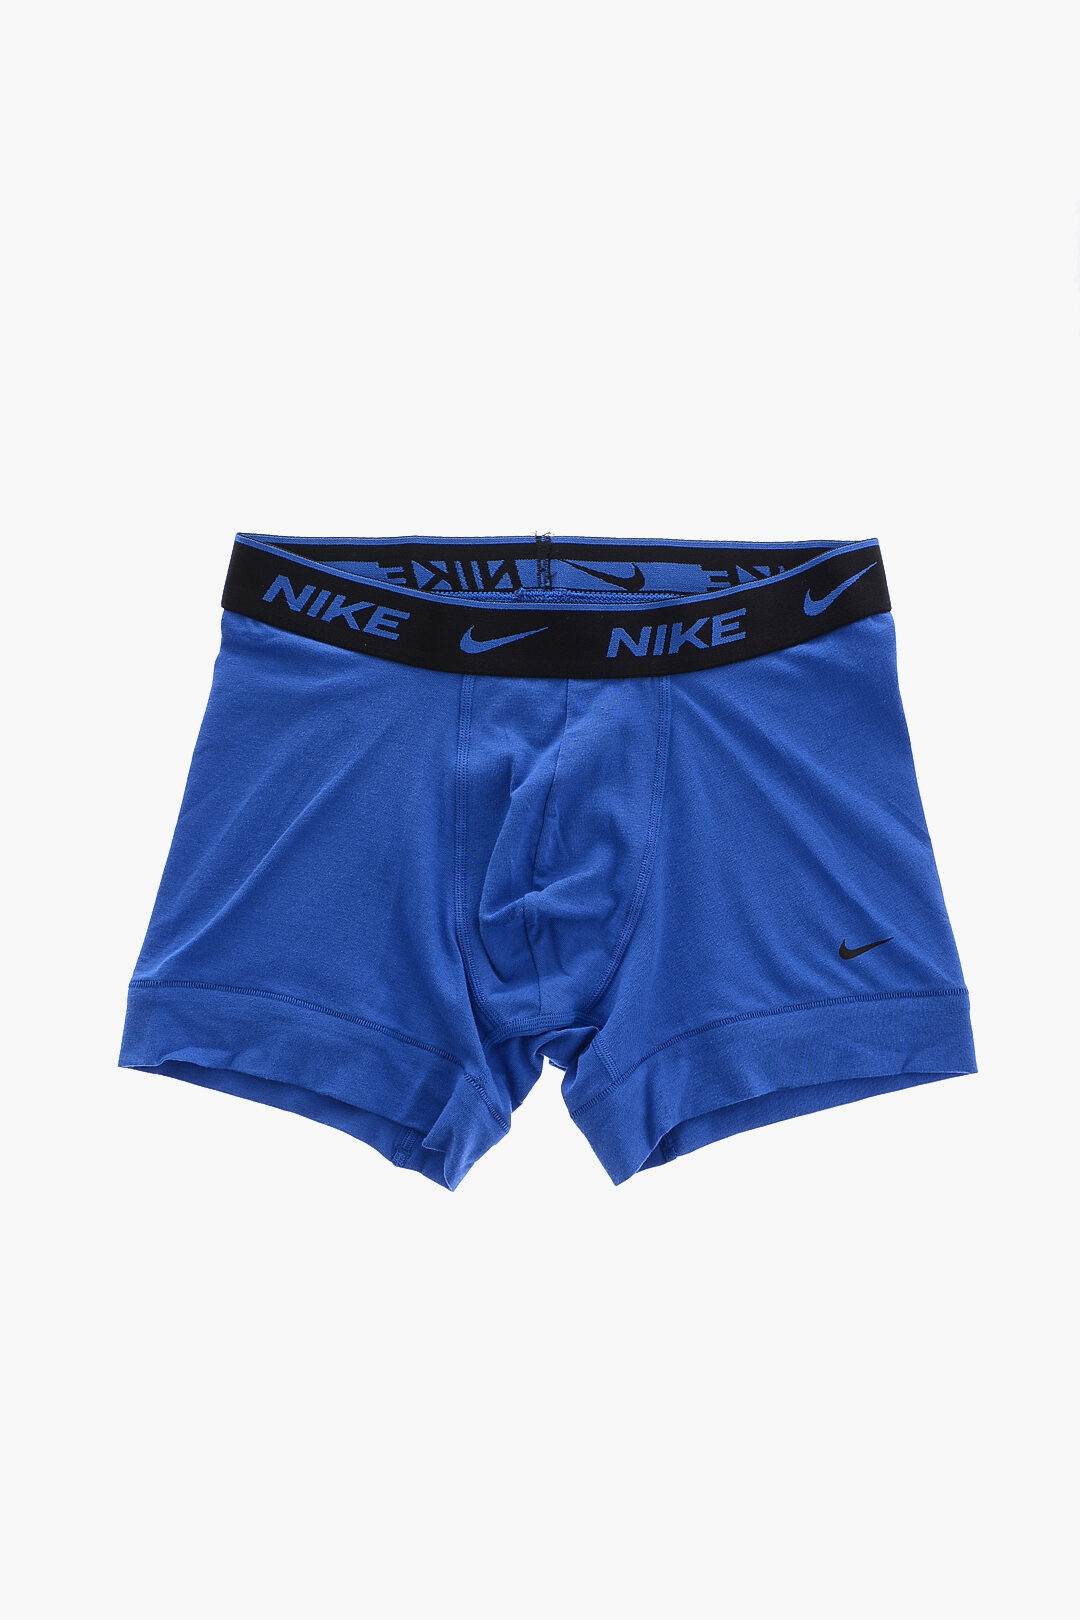 Nike Two-Tone 2 Pairs Of Boxers Set men - Glamood Outlet